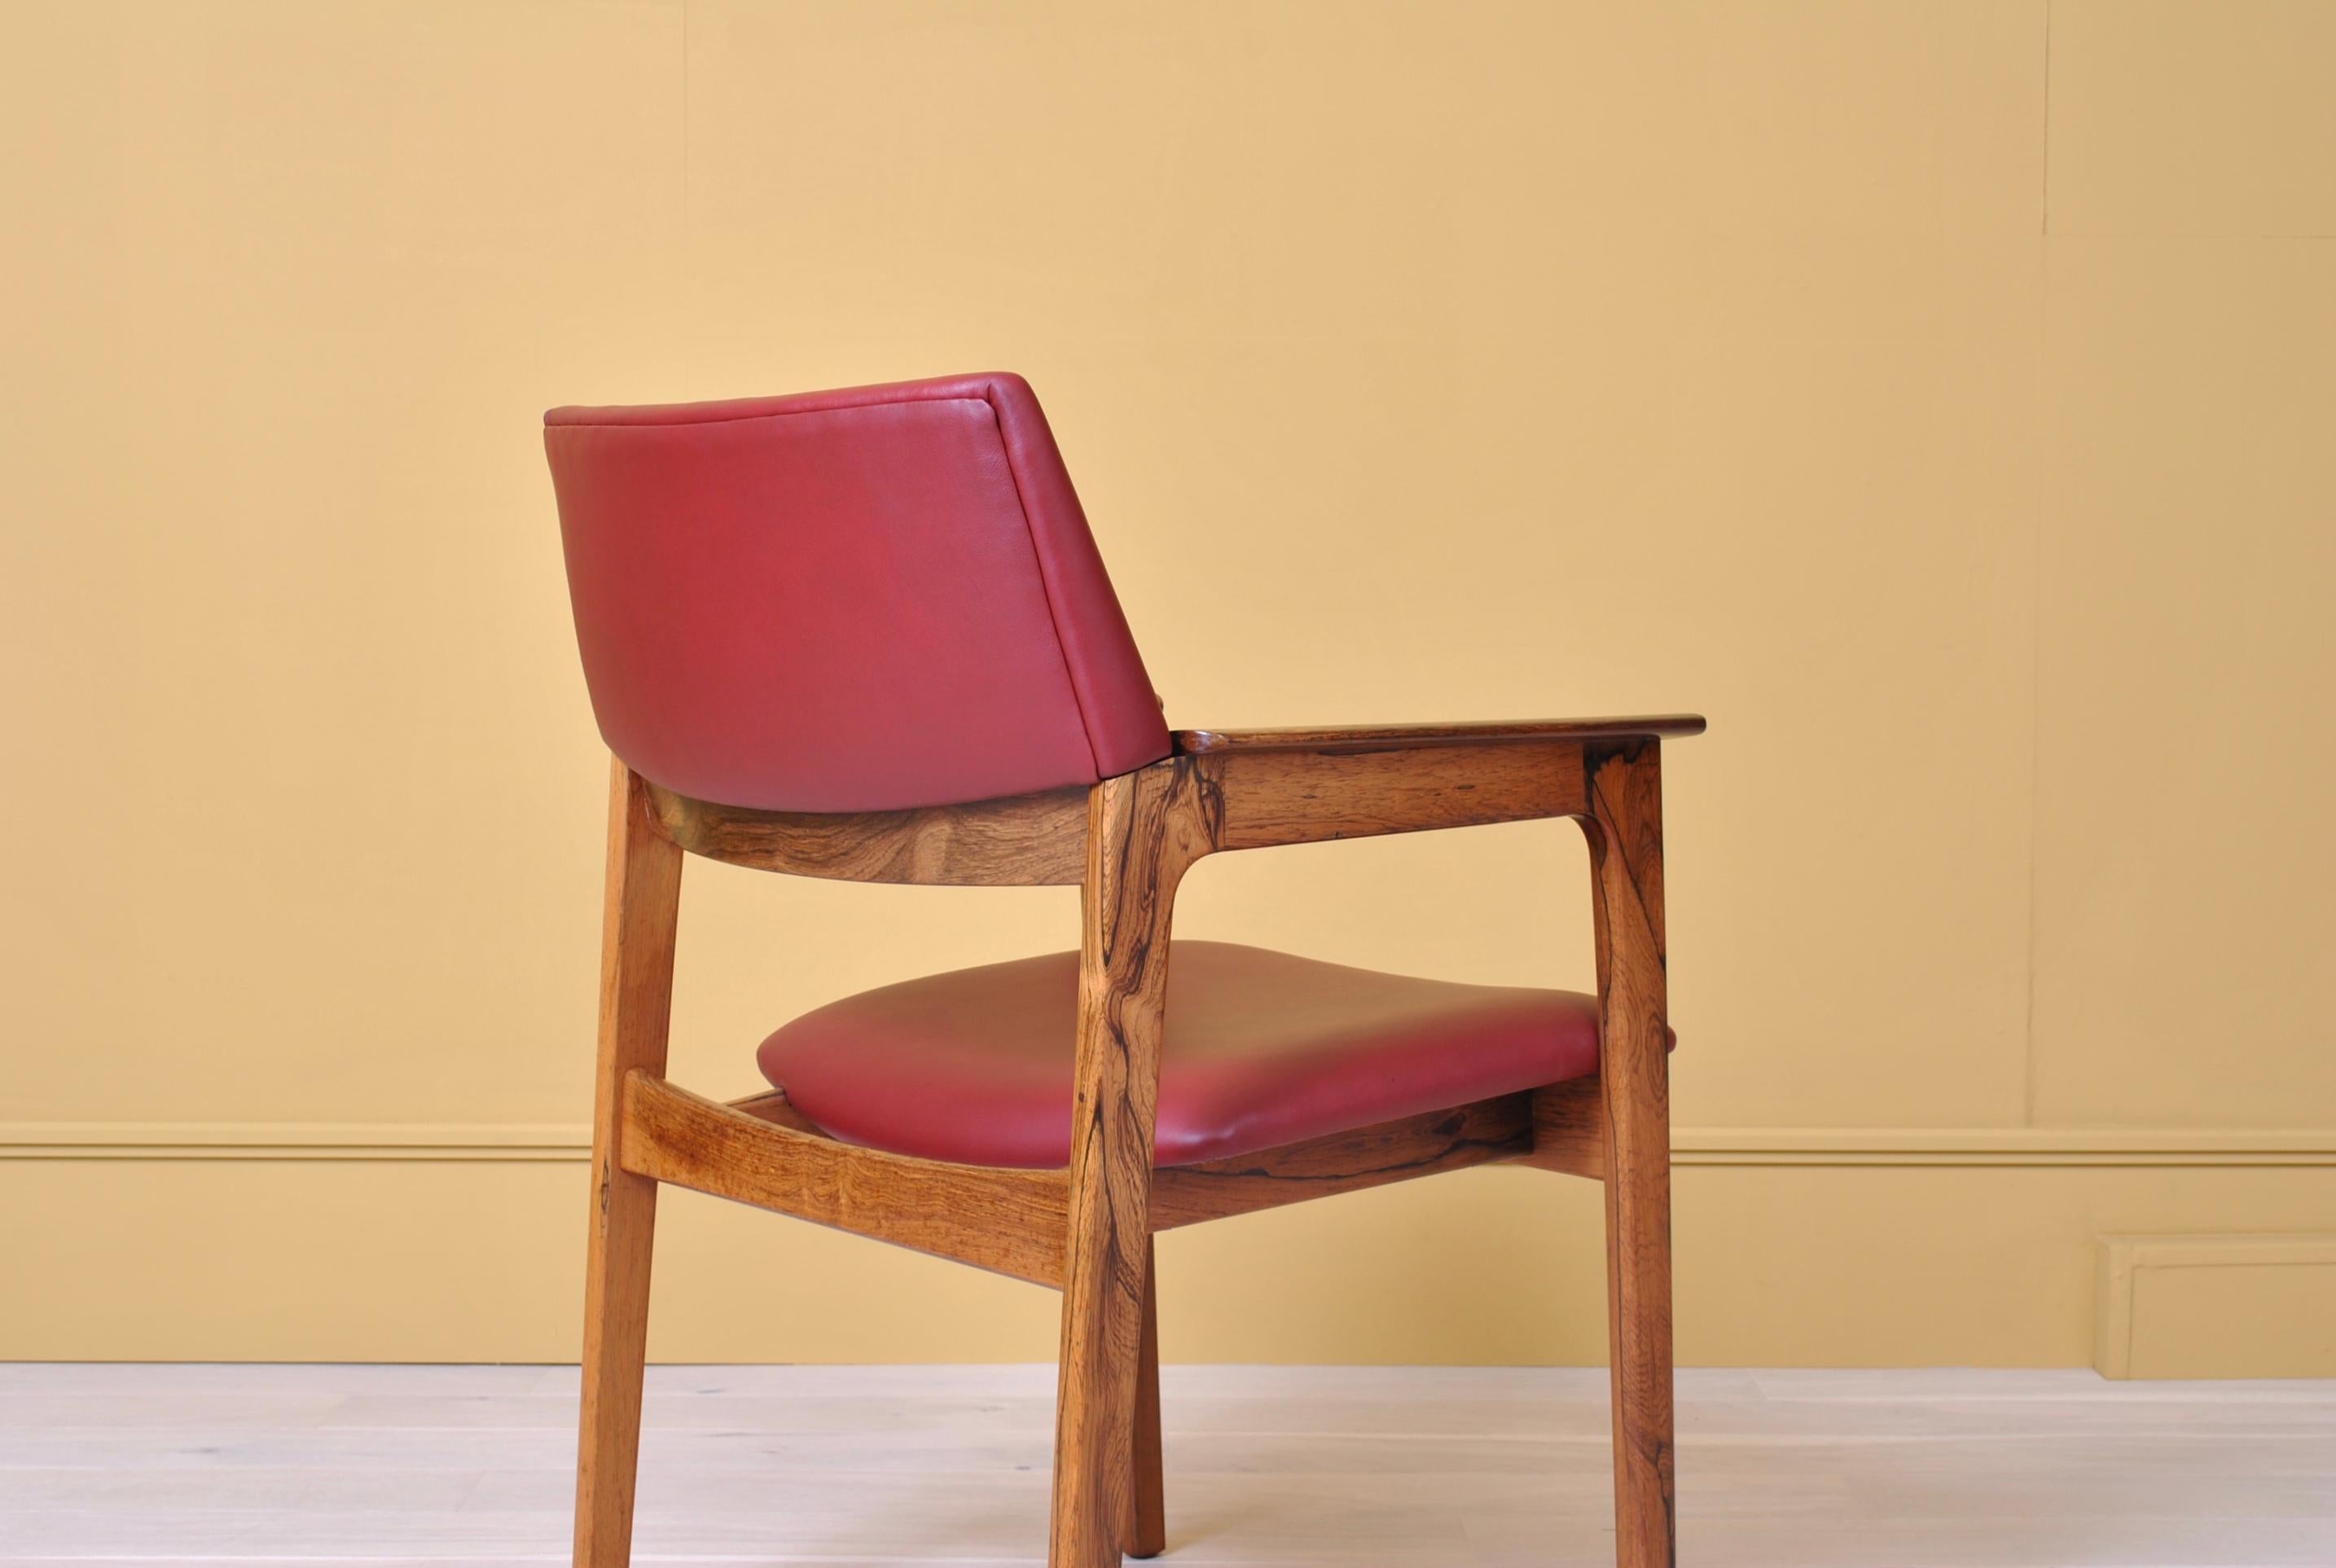 Danish Midcentury Leather Chair, Fully Reupholstered 1